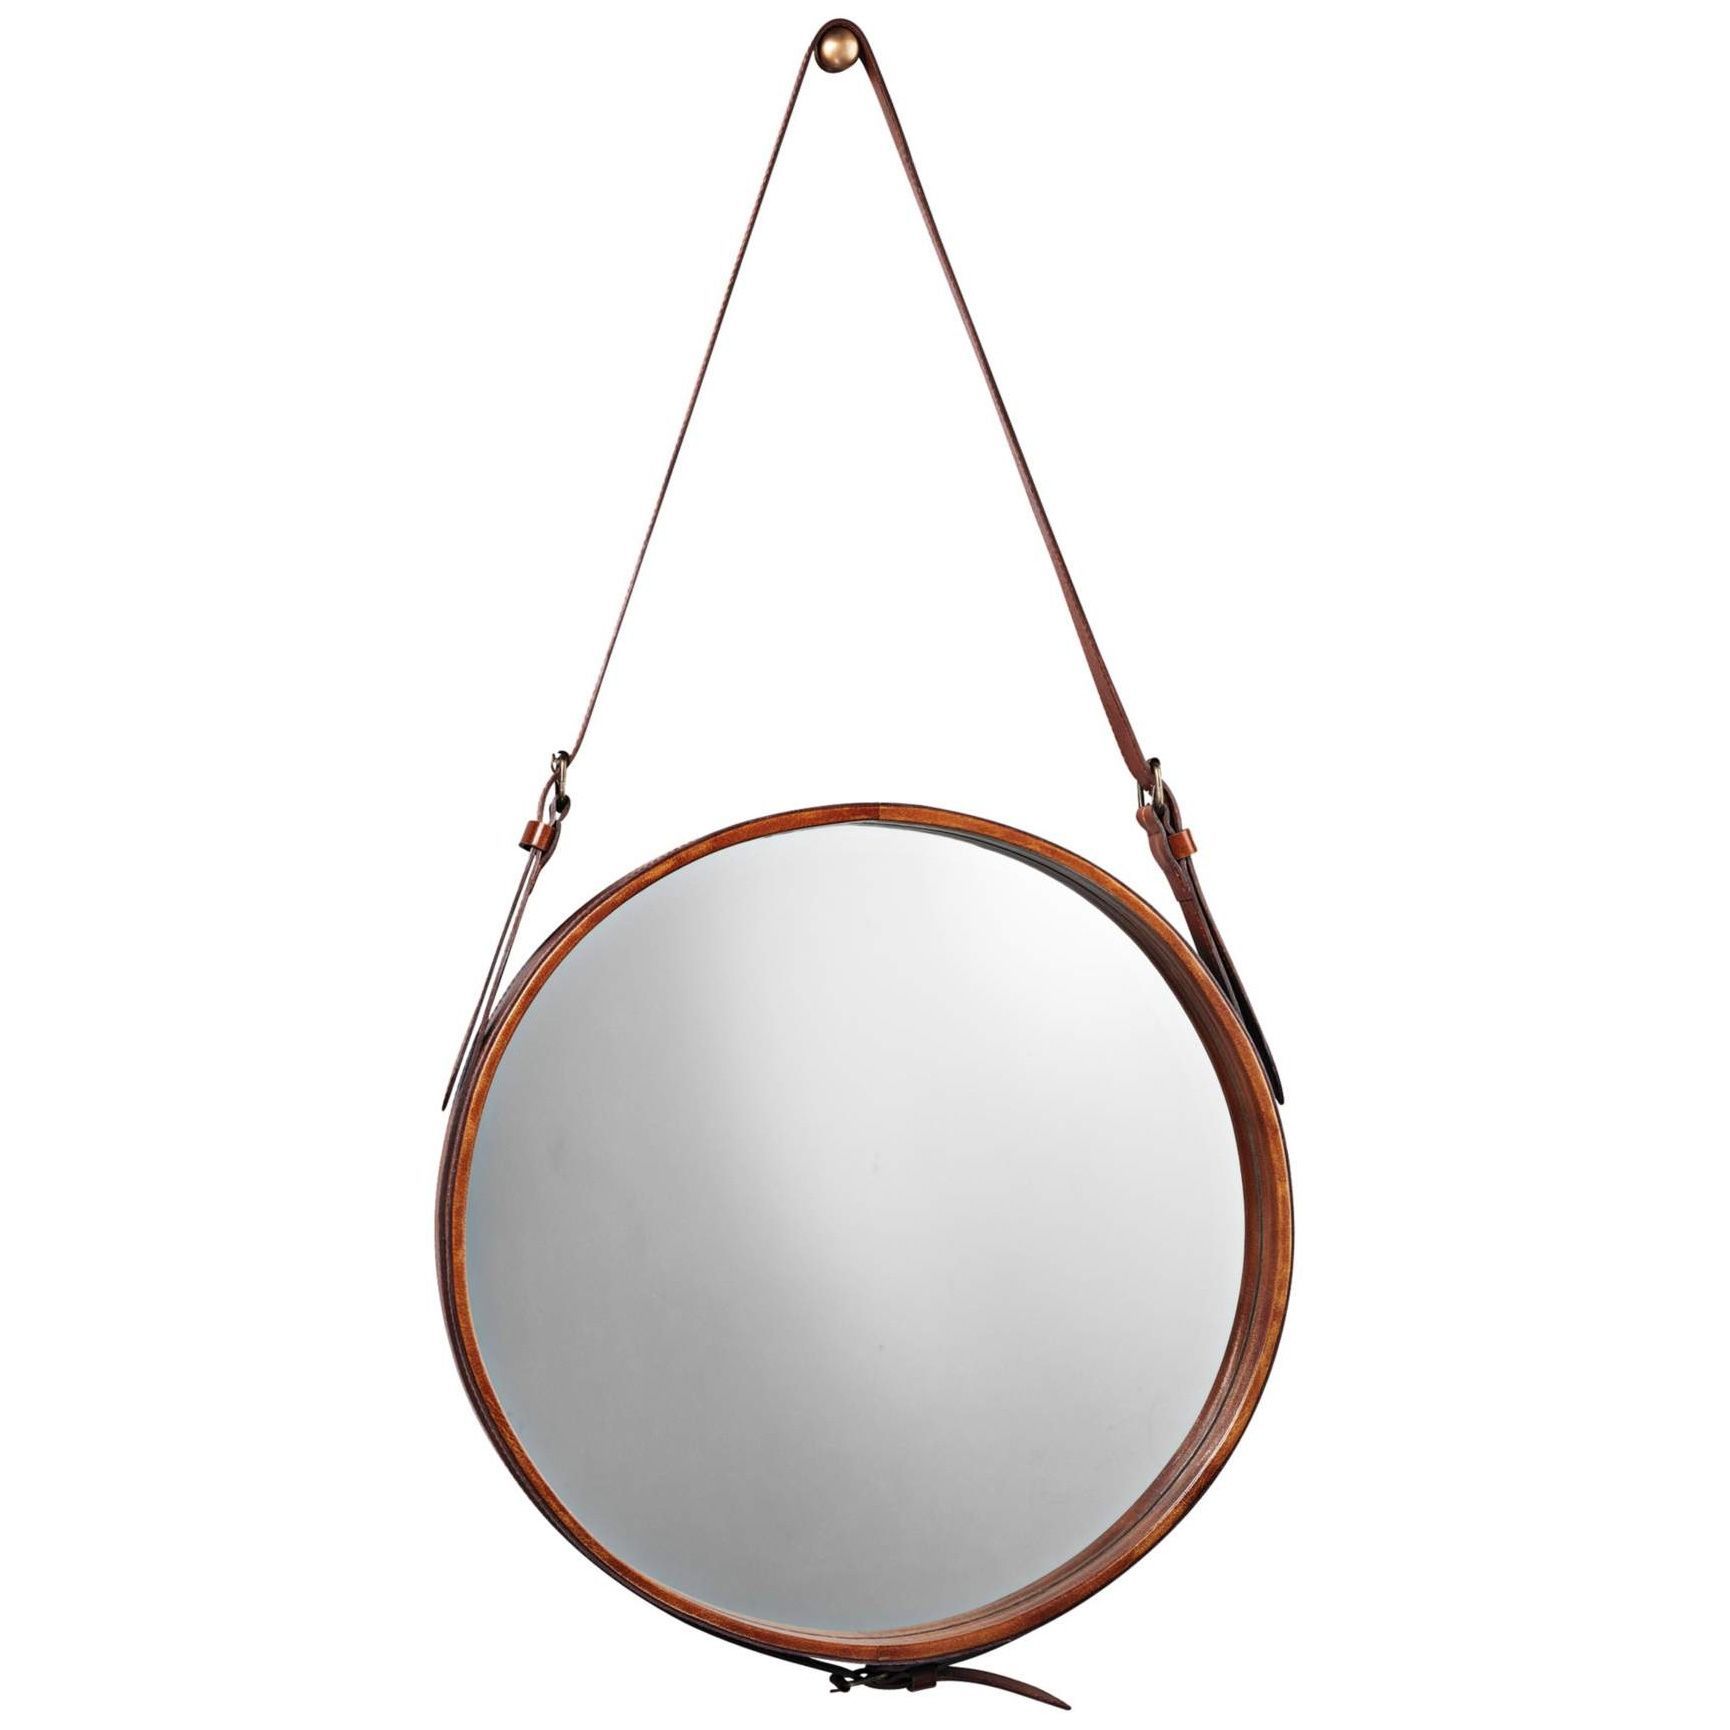 Round Leather Mirror | Round Wall Mirror, Small Round Mirrors, Round Throughout Brown Leather Round Wall Mirrors (View 2 of 15)